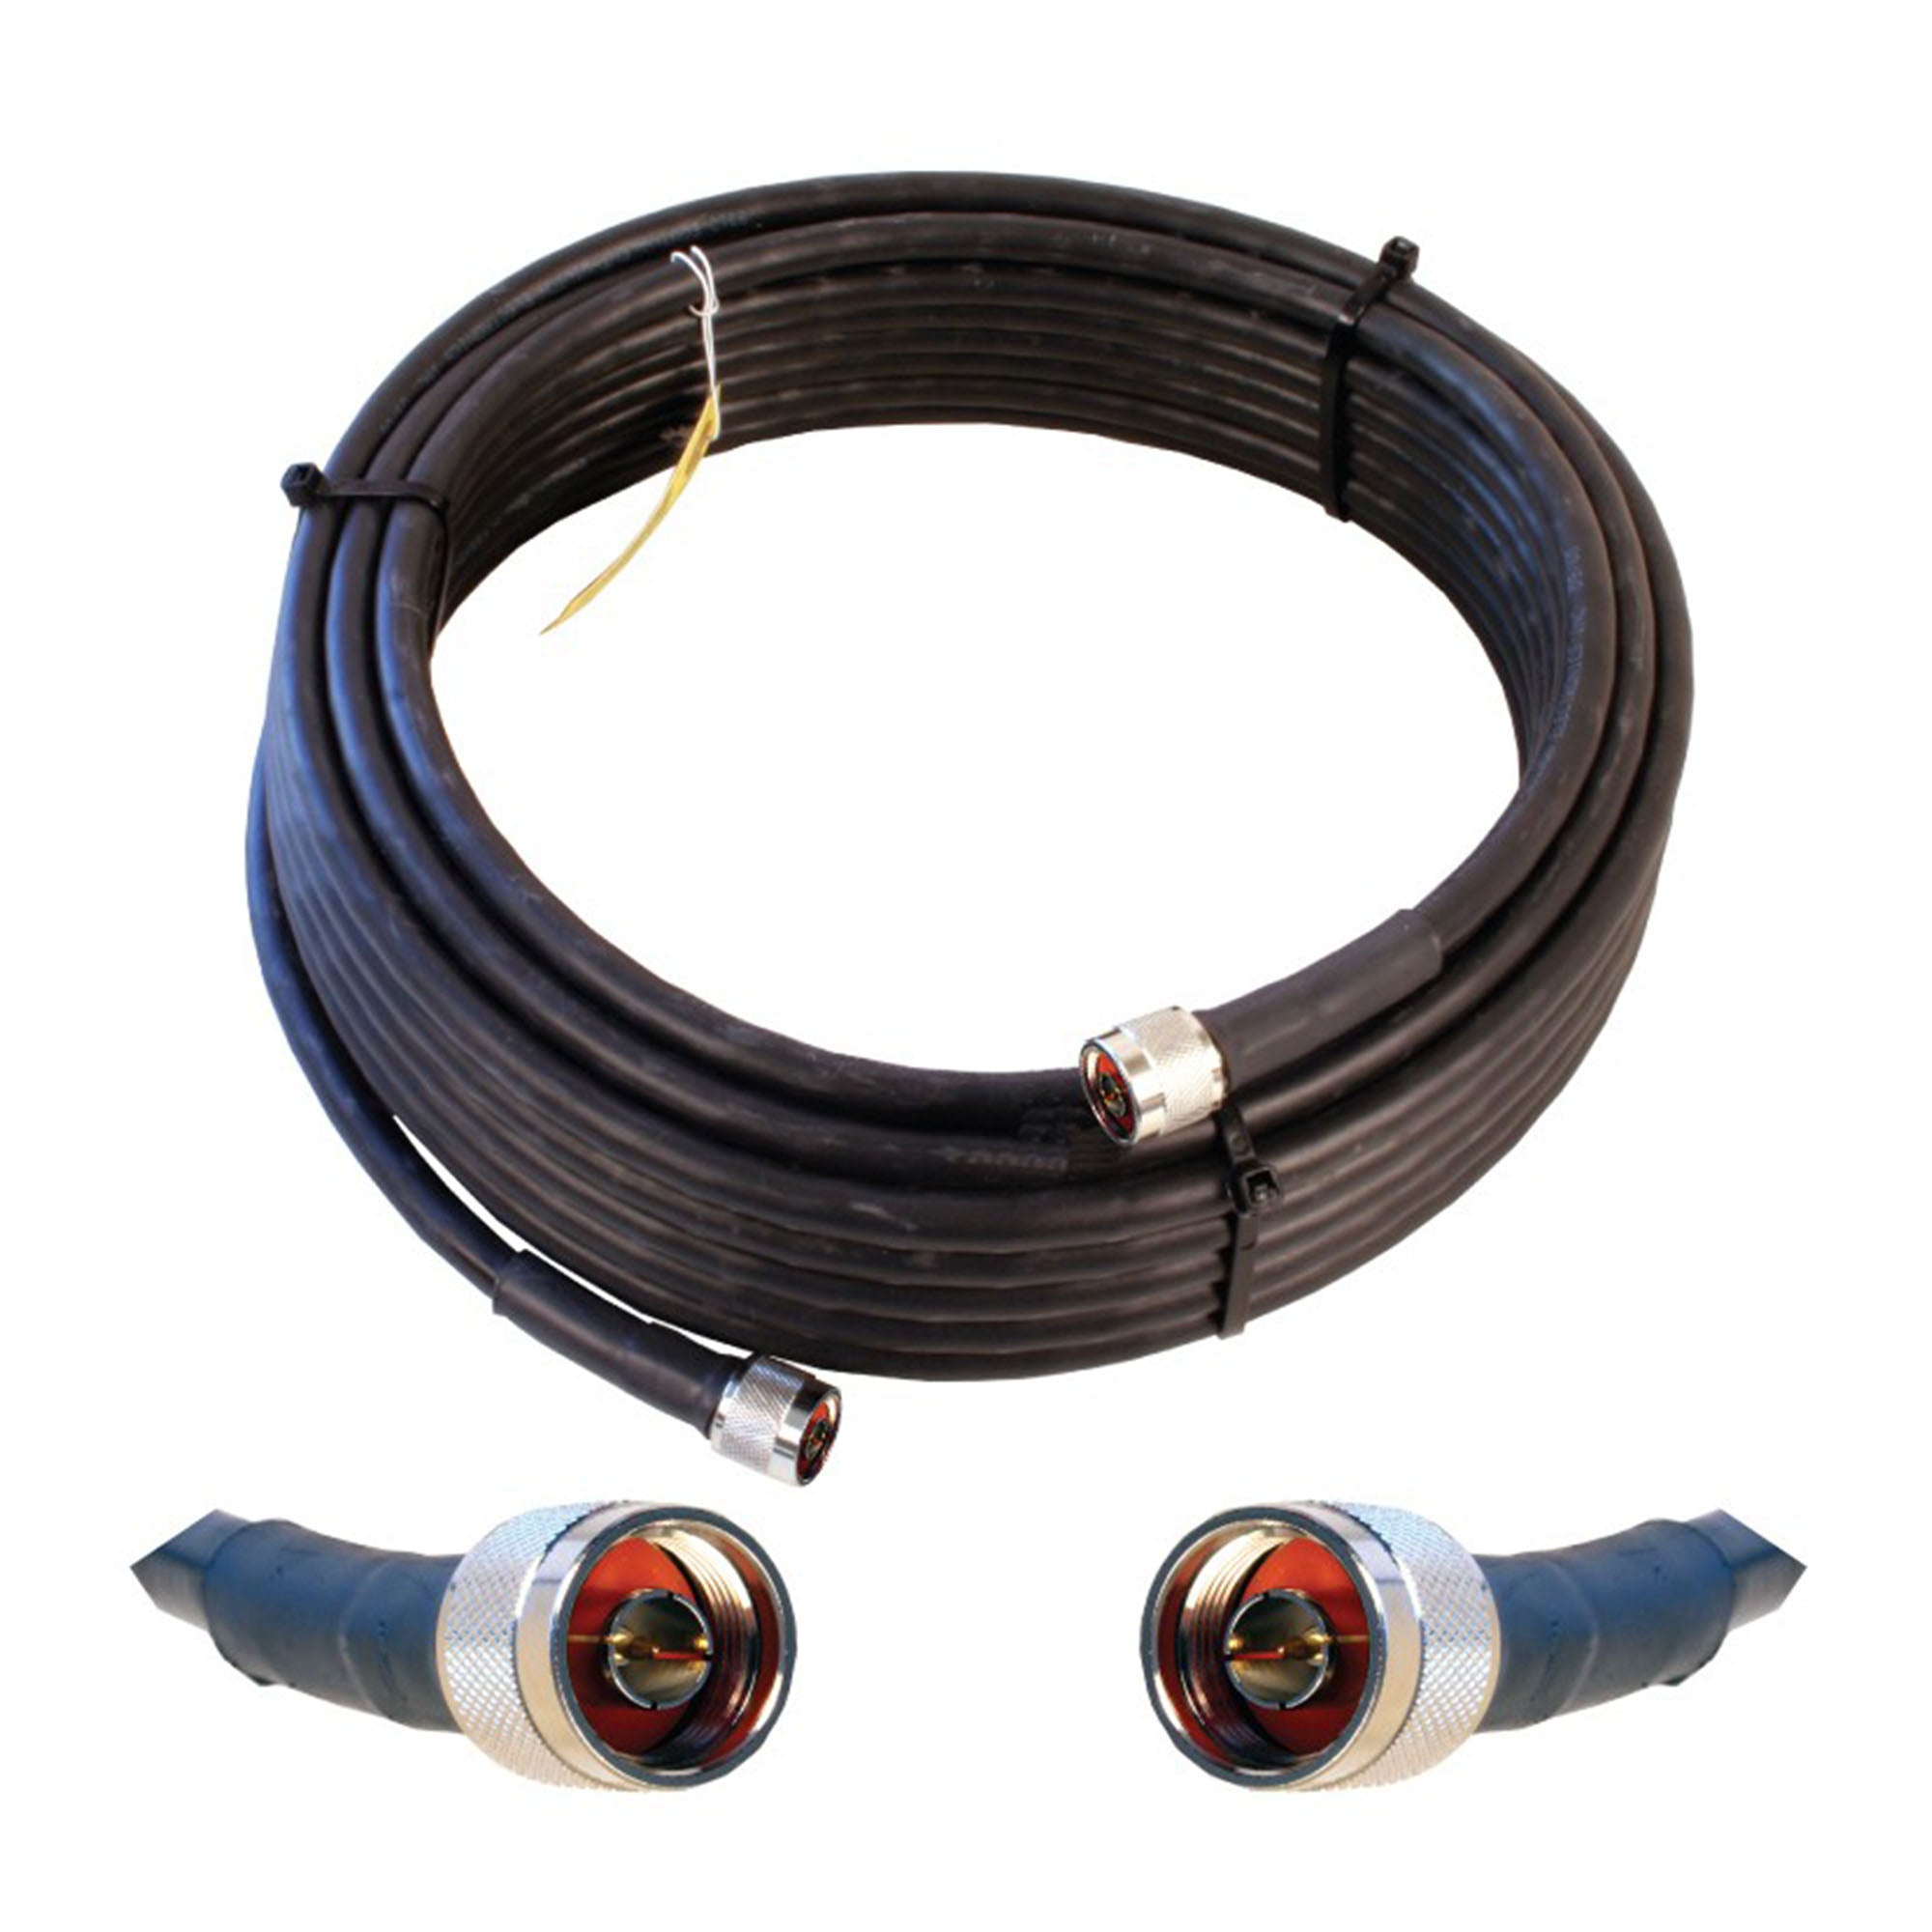 Cable 50 ft. Black LMR400 eqiv. ultra low loss cable (N male - N male ends) - 670WI952350